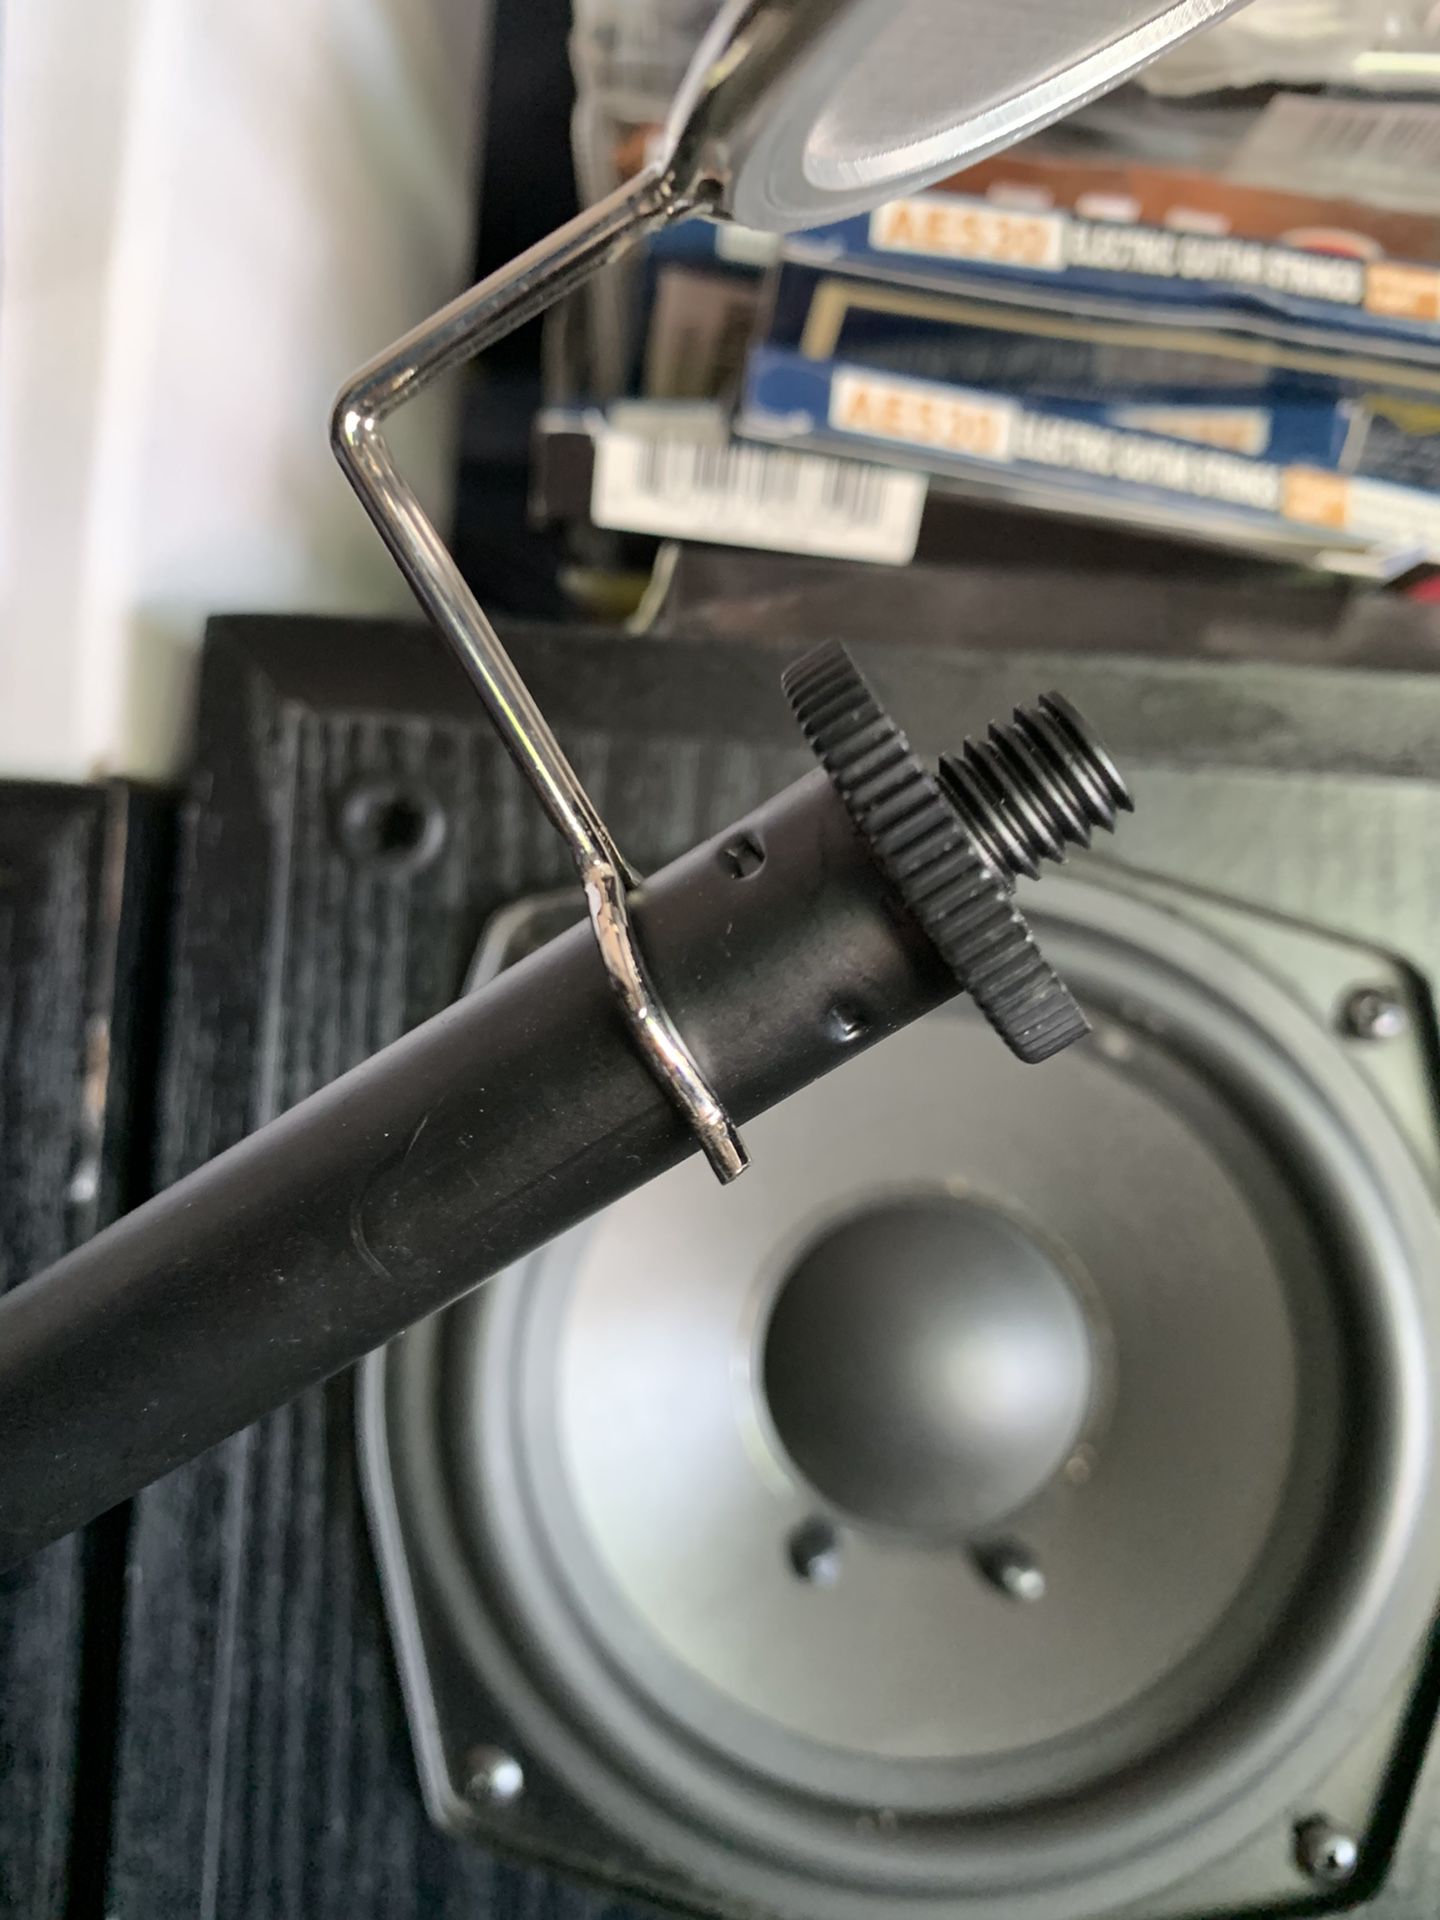 Mini pop filter for stand